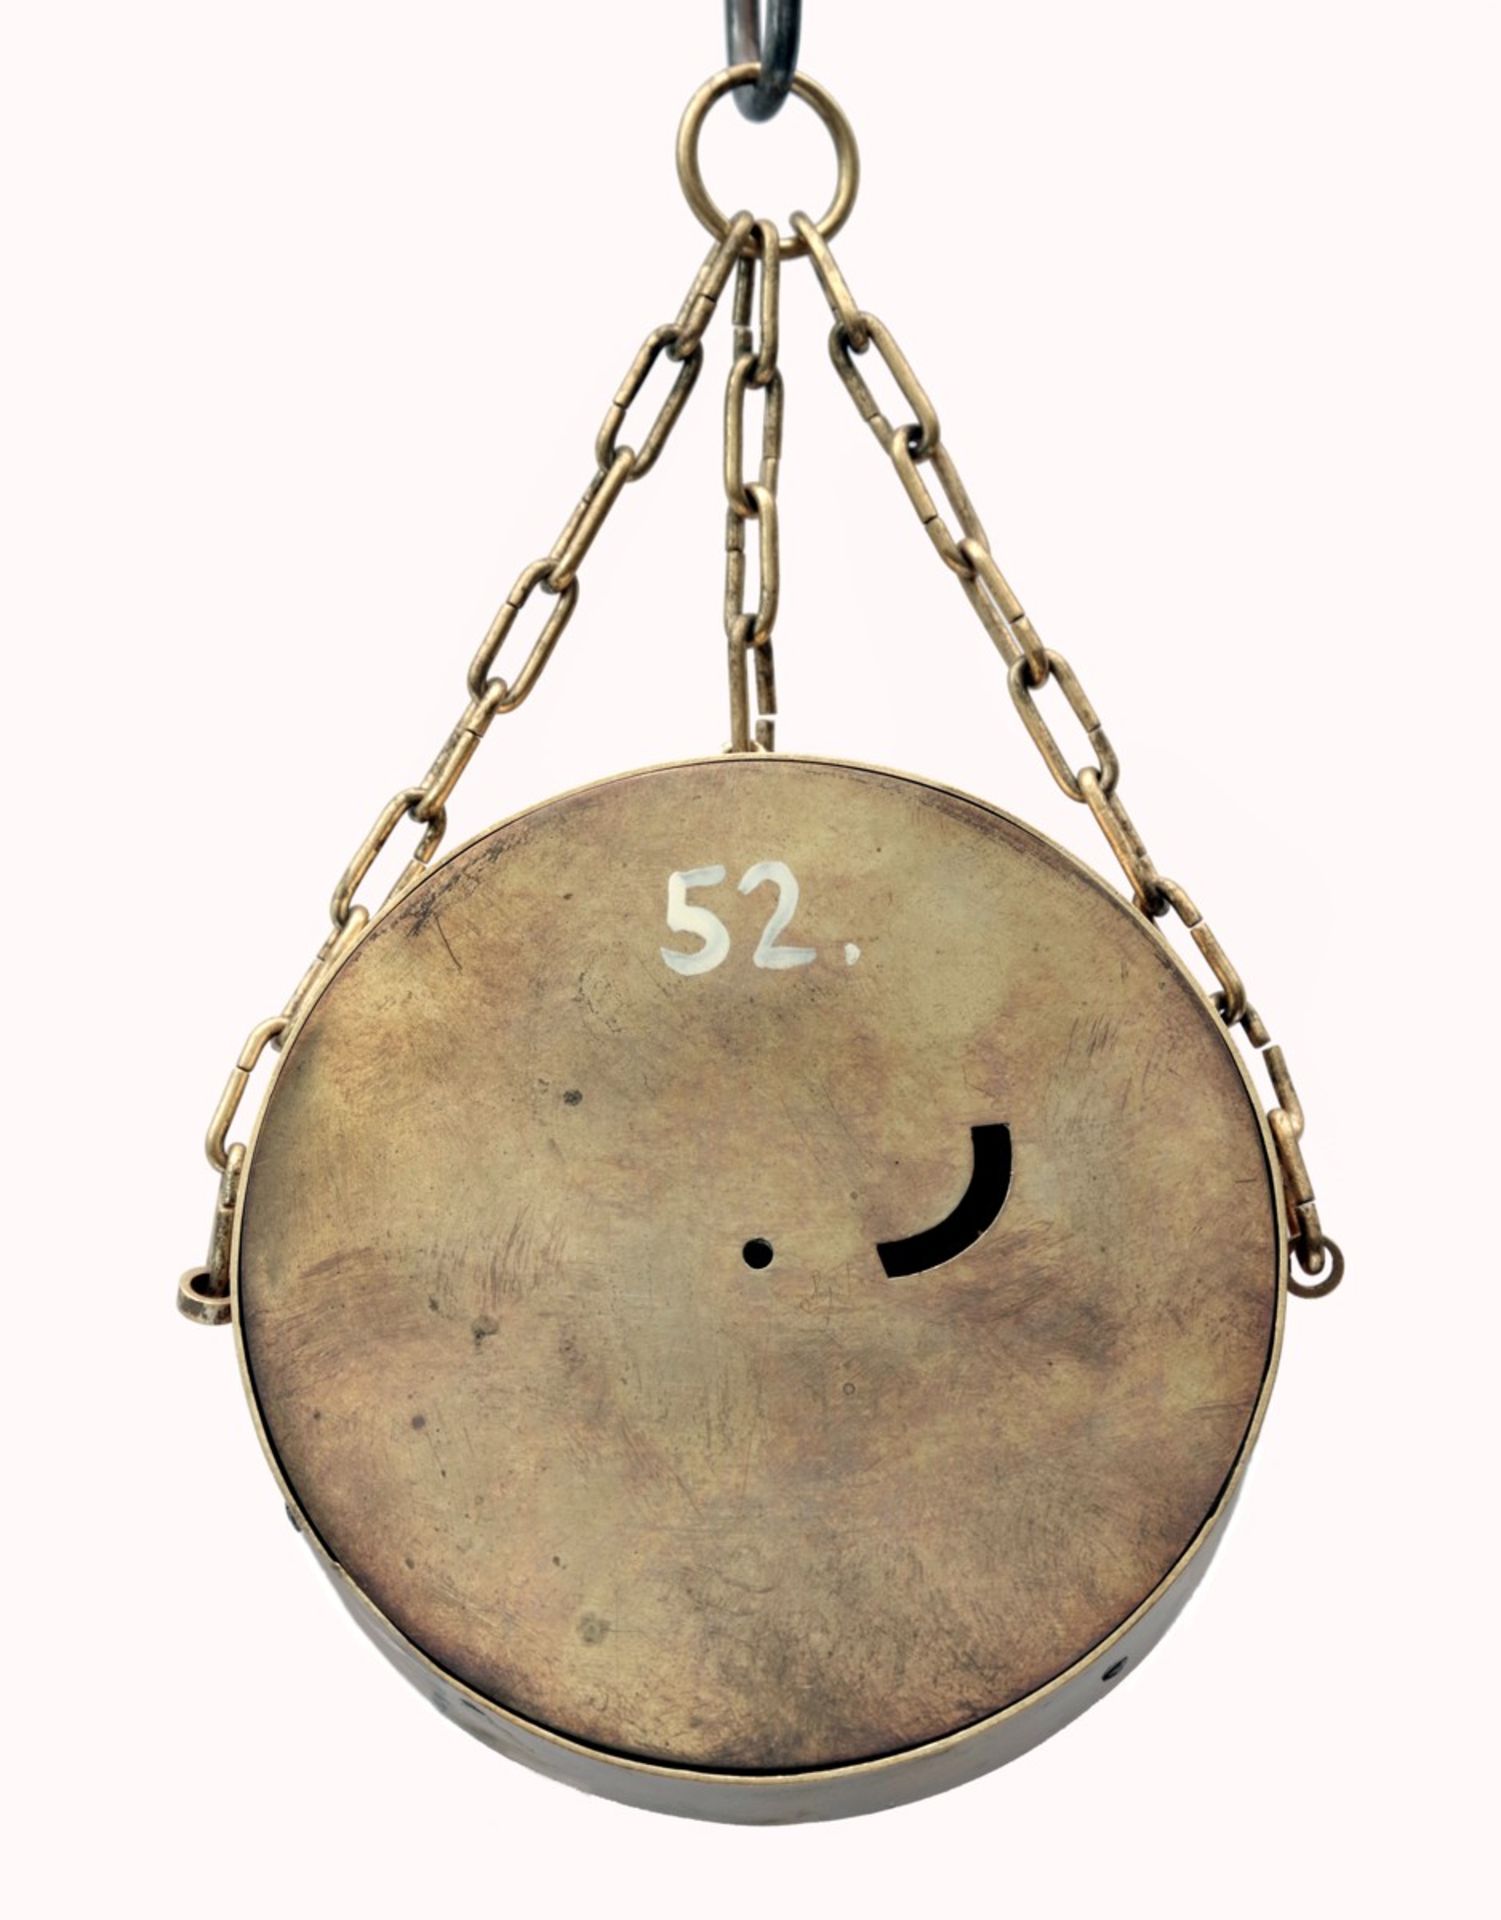 A Hanging Wall Clock With Chain - Image 2 of 2